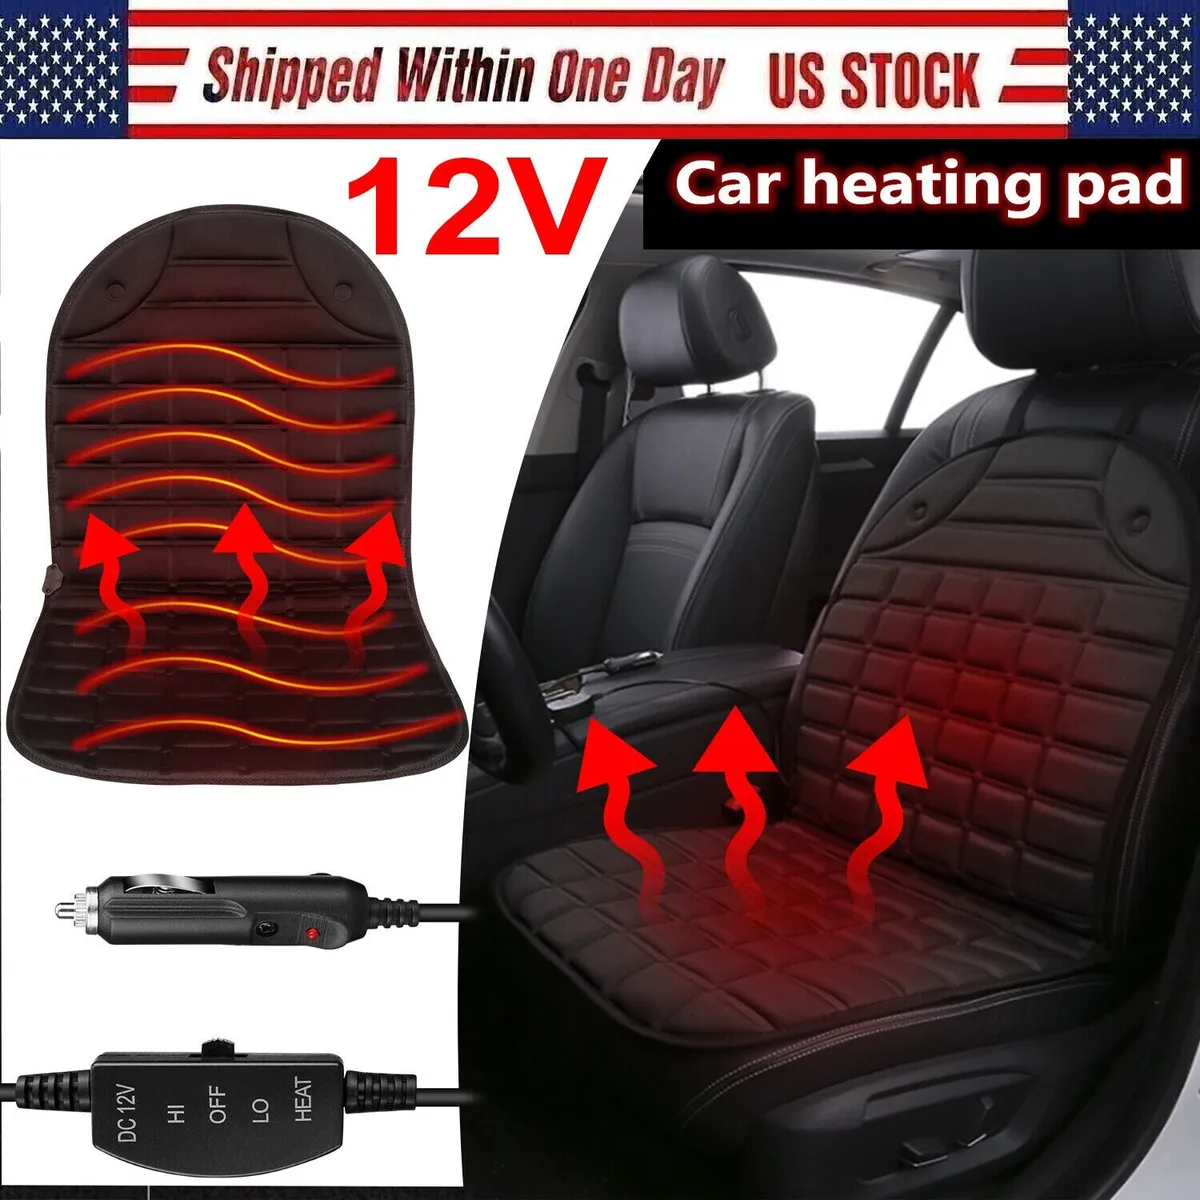 12V Car Seat Pad Cushion Cover Heating Heater Warm Heated Cold